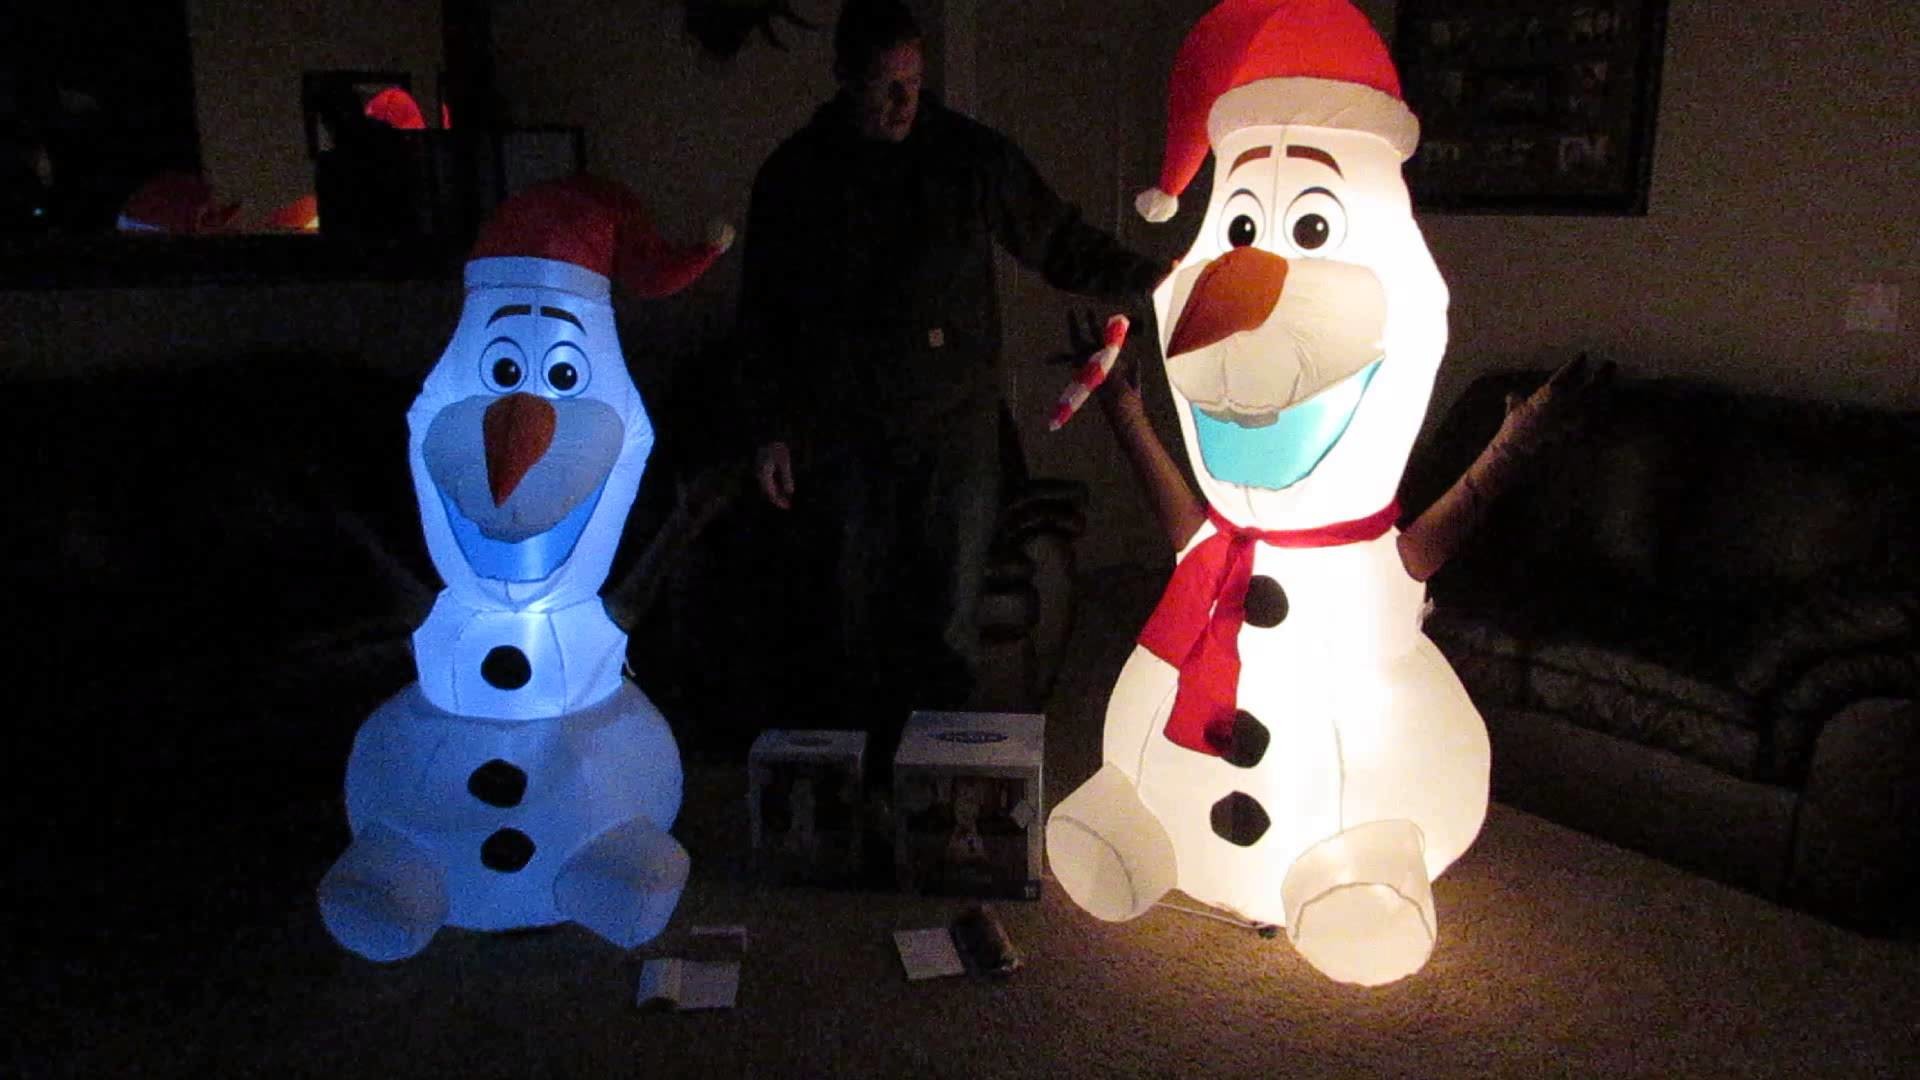 1920x1080 Christmas Inflatable OLAF from Disney's Frozen! 6 feet vs 5 feet? - YouTube